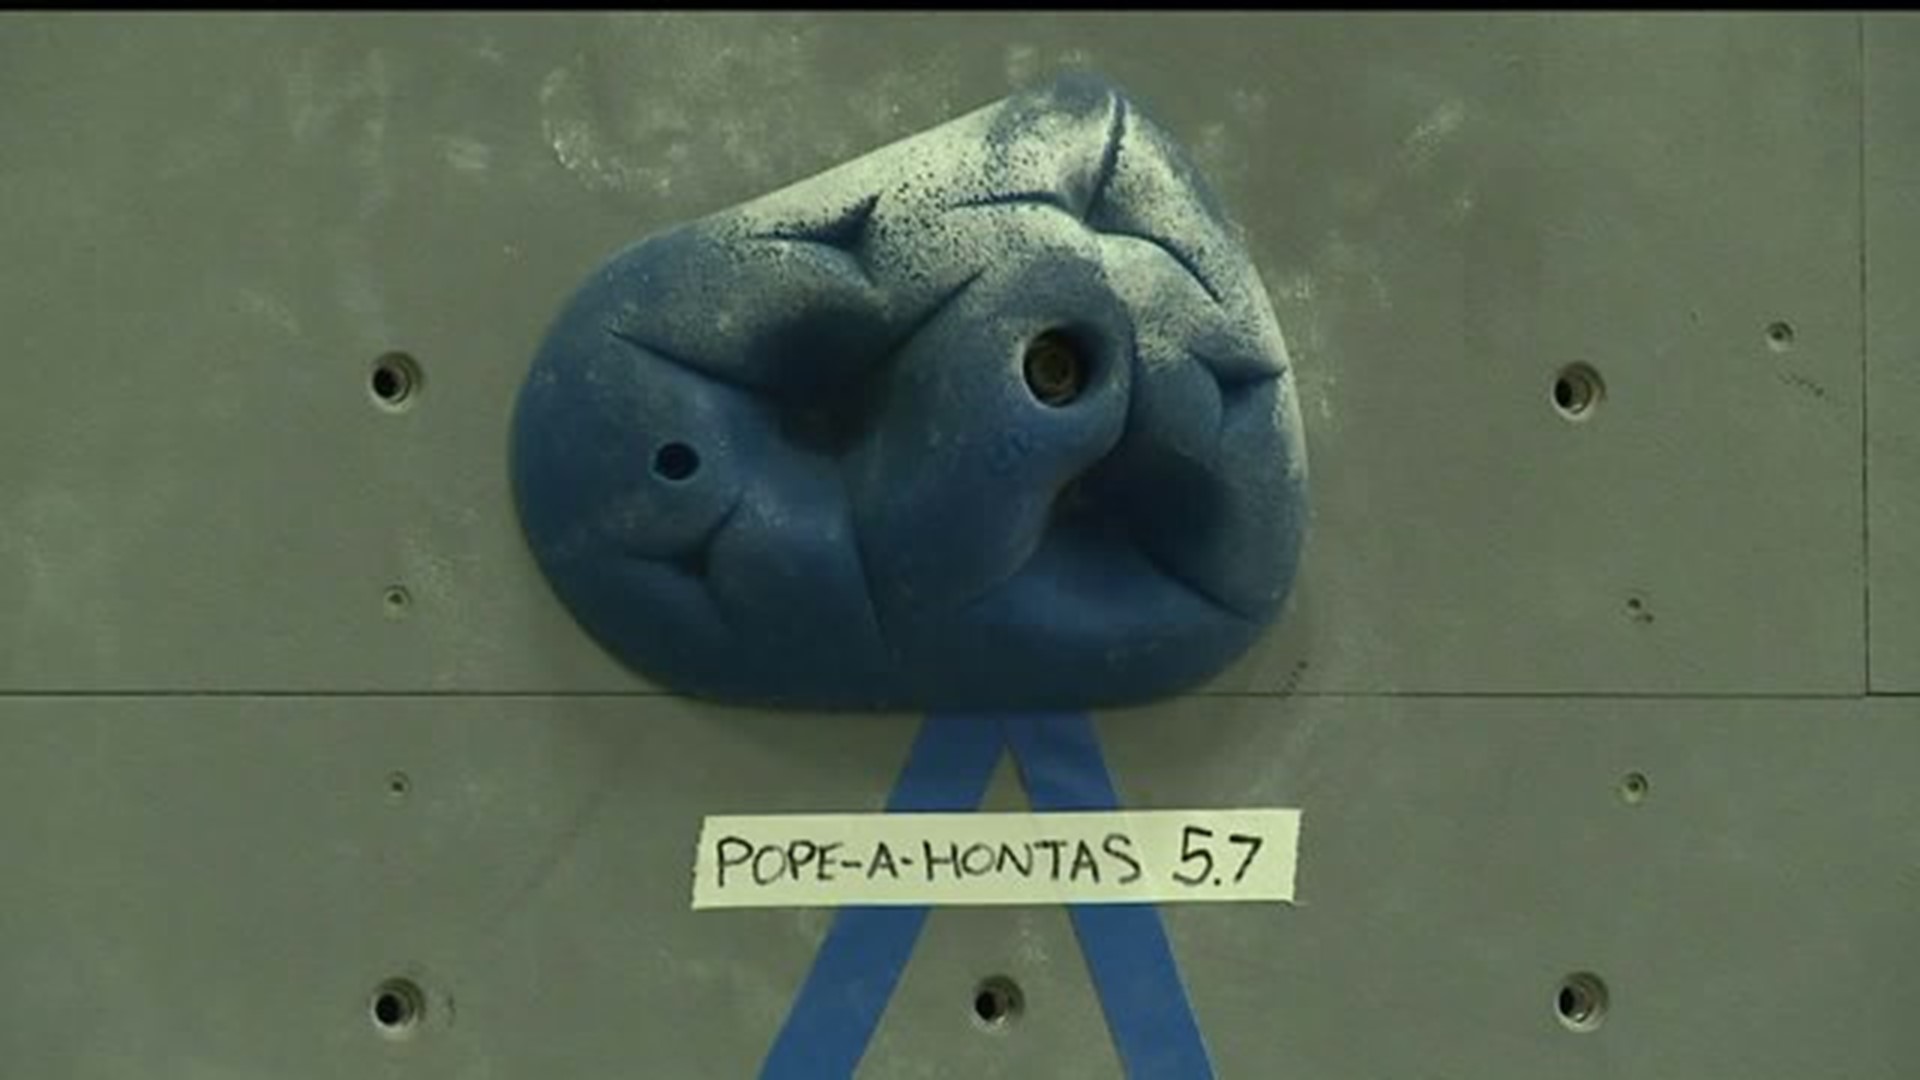 SPOOKY NOOK ROCK CLIMBING WALLS NAMED FOR POPE FRANCIS